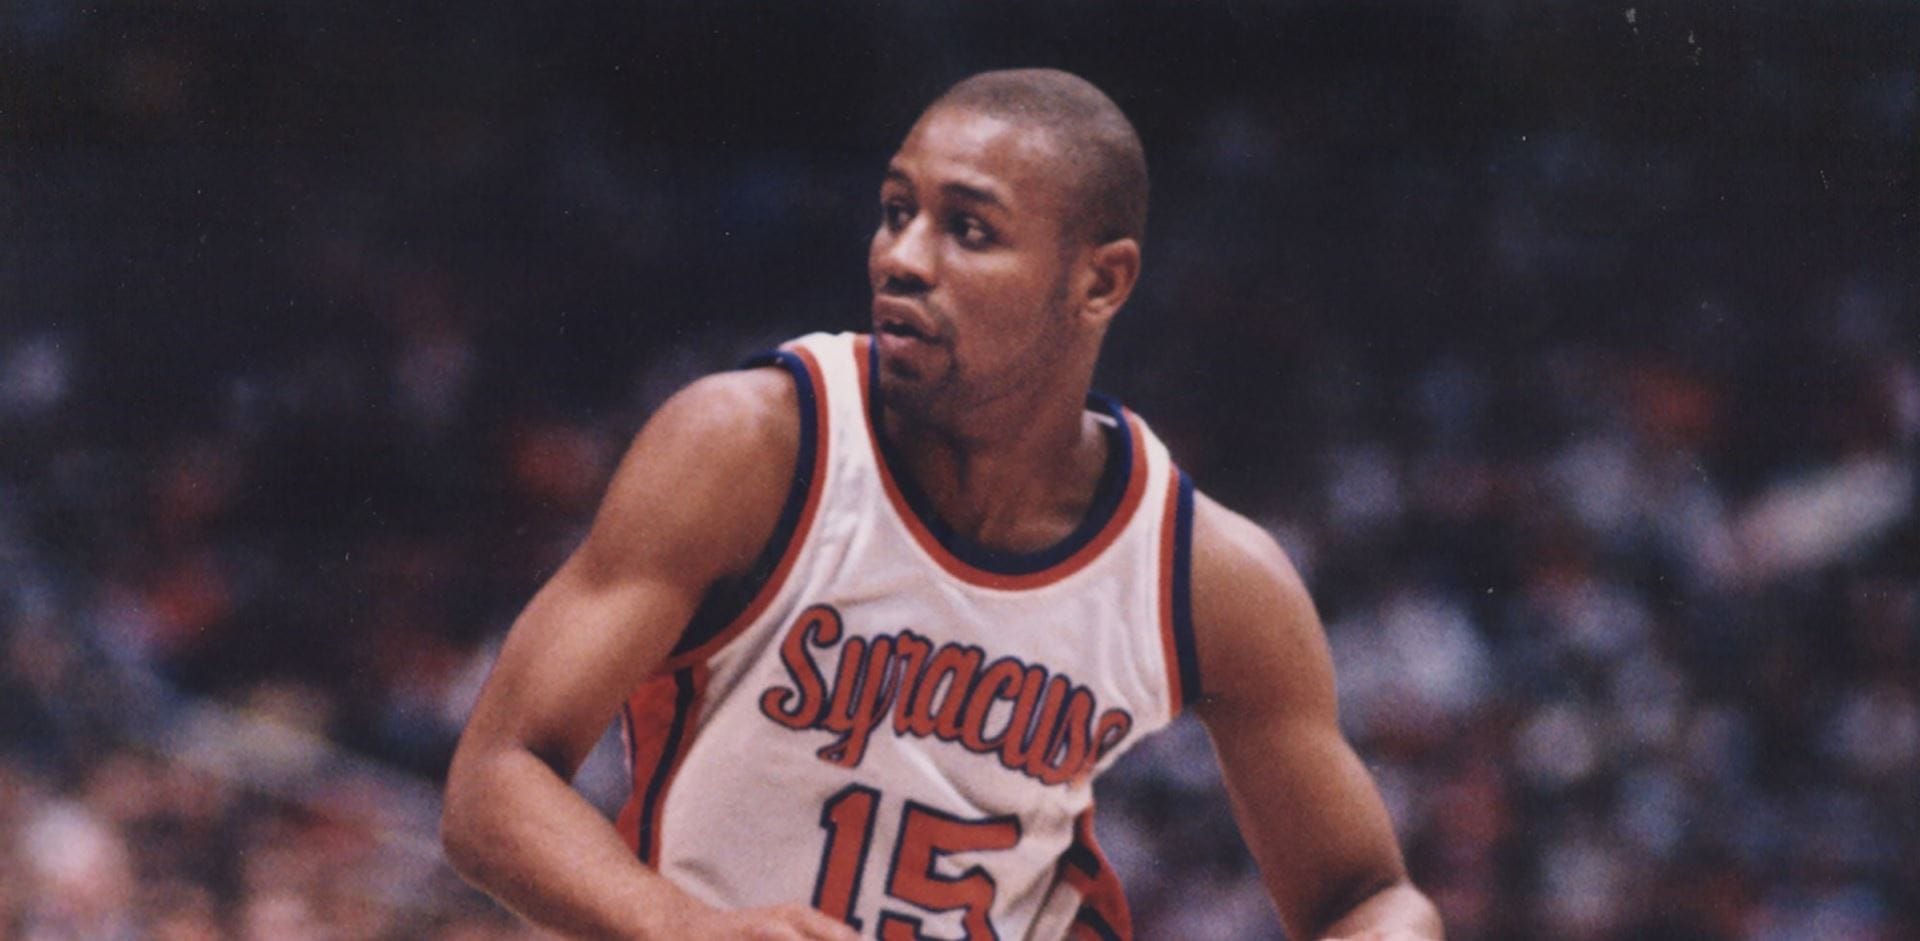 Adrian Autry started all four years at Syracuse (1990-94)